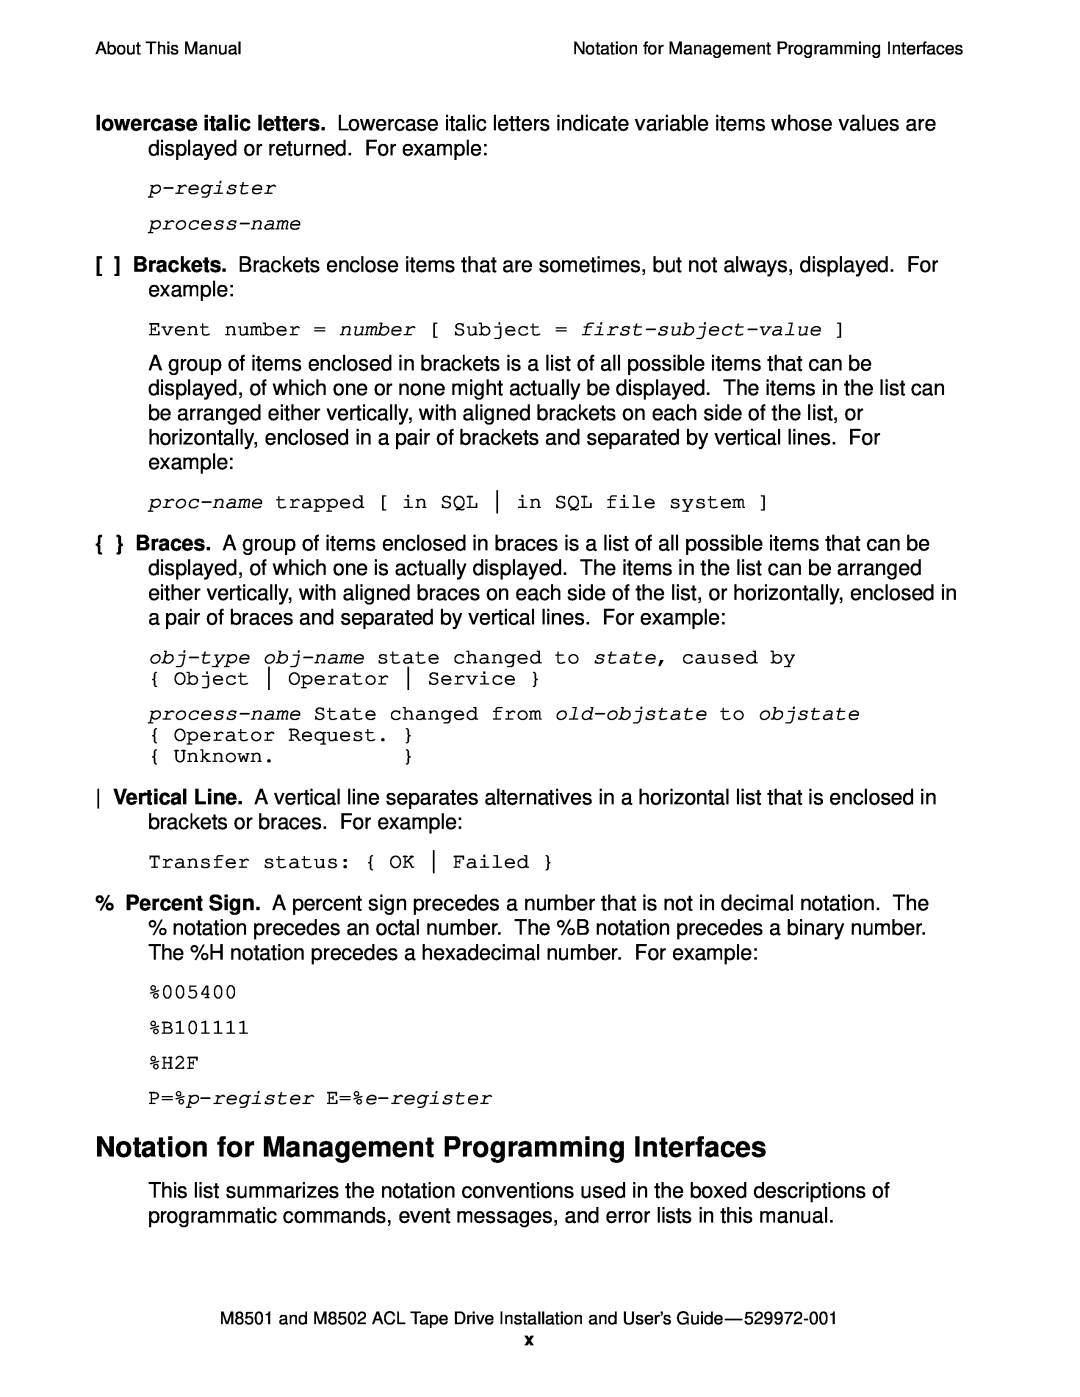 SMC Networks M8501 manual Notation for Management Programming Interfaces, p-register process-name, Operator, Unknown 